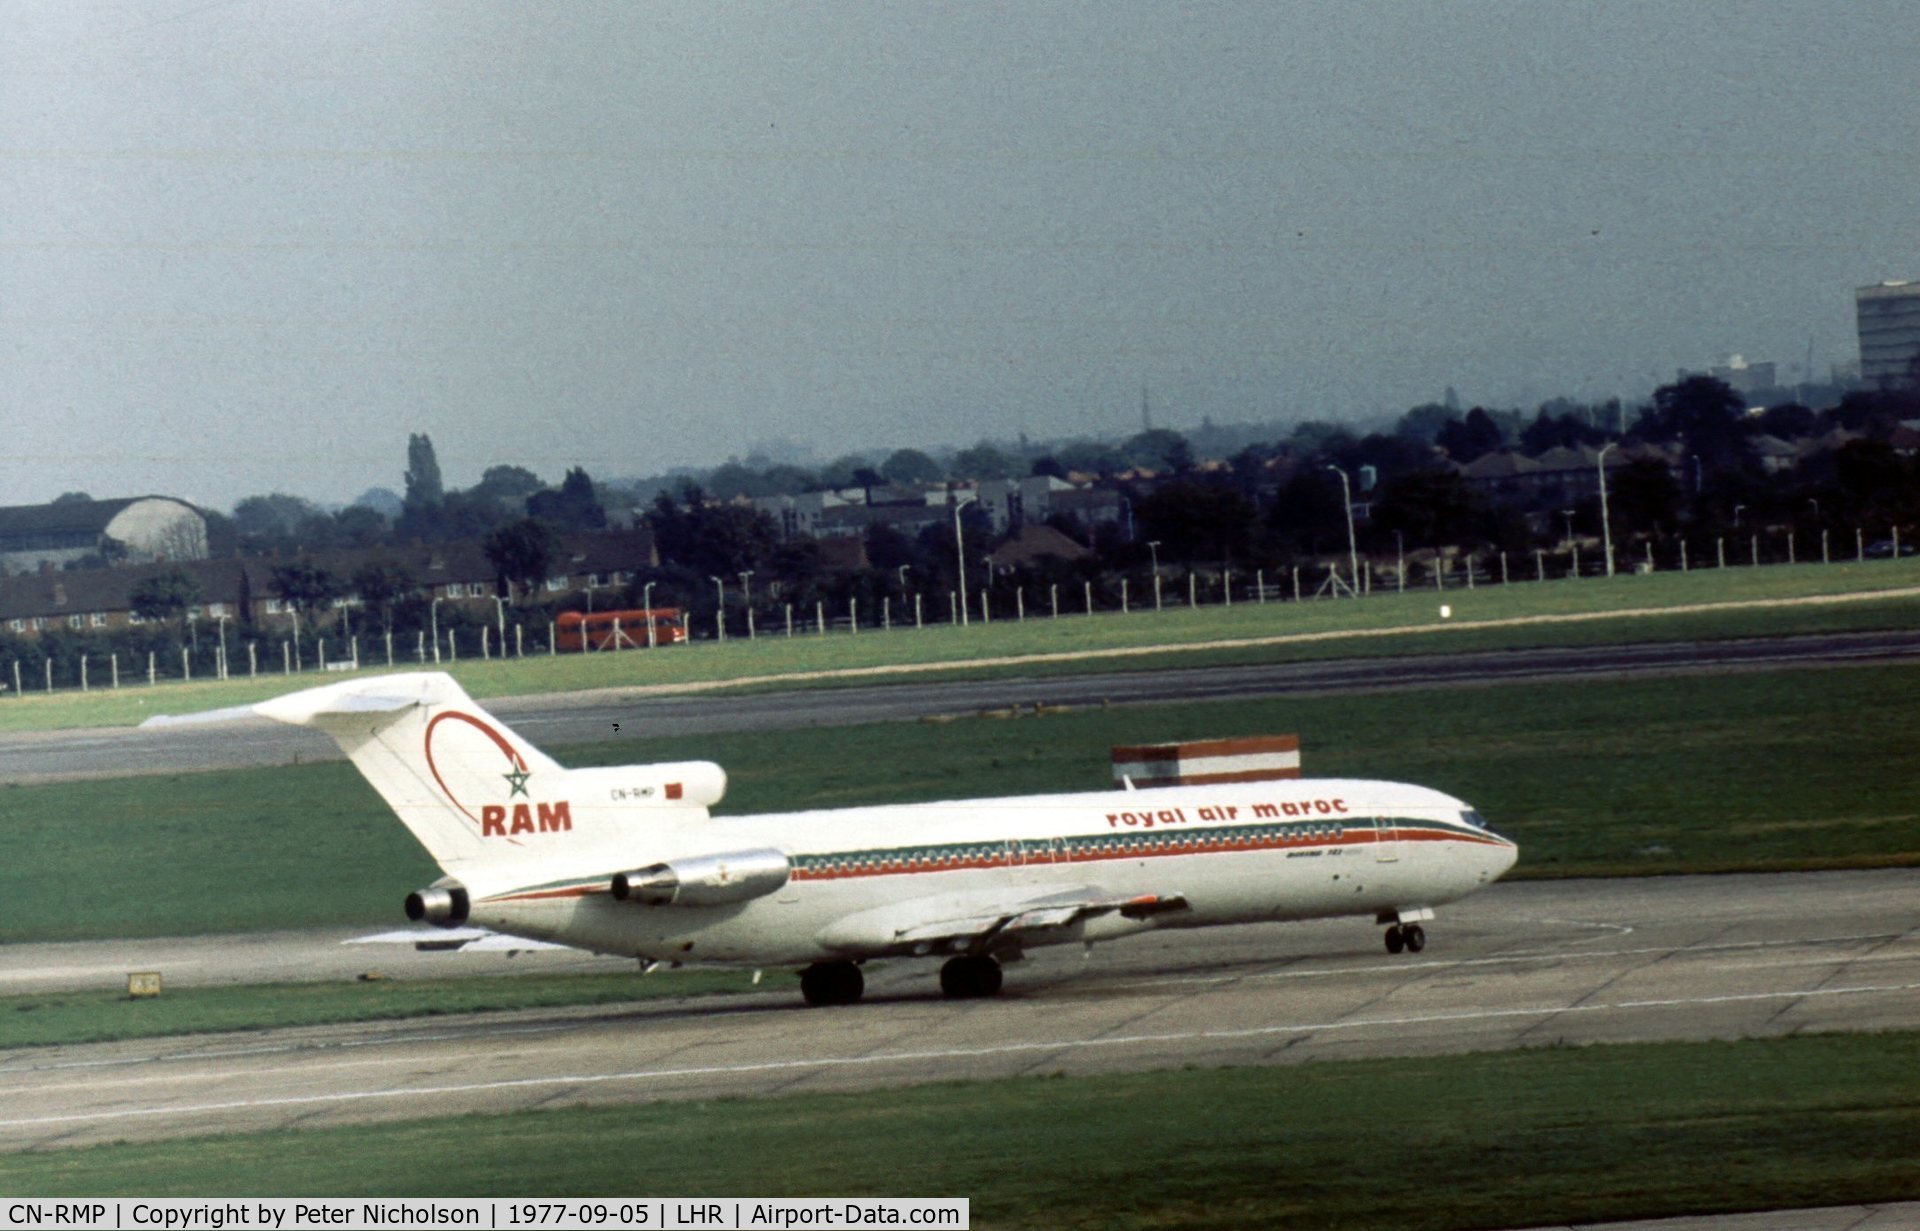 CN-RMP, 1977 Boeing 727-2B6 C/N 21298, Before conversion to freighter configuration, this 727 served with RAM Royal Air Maroc as seen at London Heathrow in September 1977.